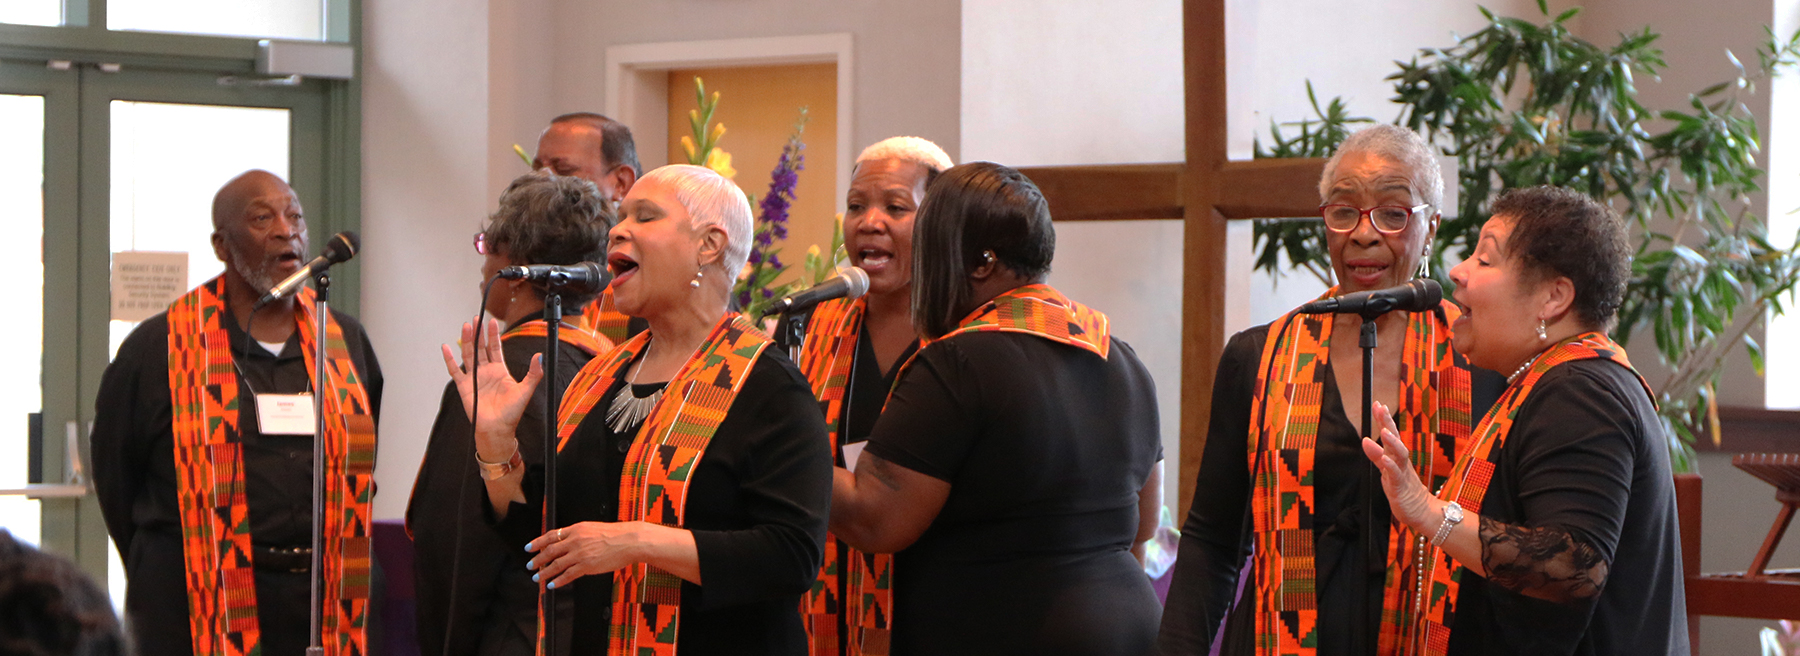 The Peace Choir sang several of Robina Winbush’s favorite songs during worship at the PC(USA) Chapel. Photo by Angie Stevens.